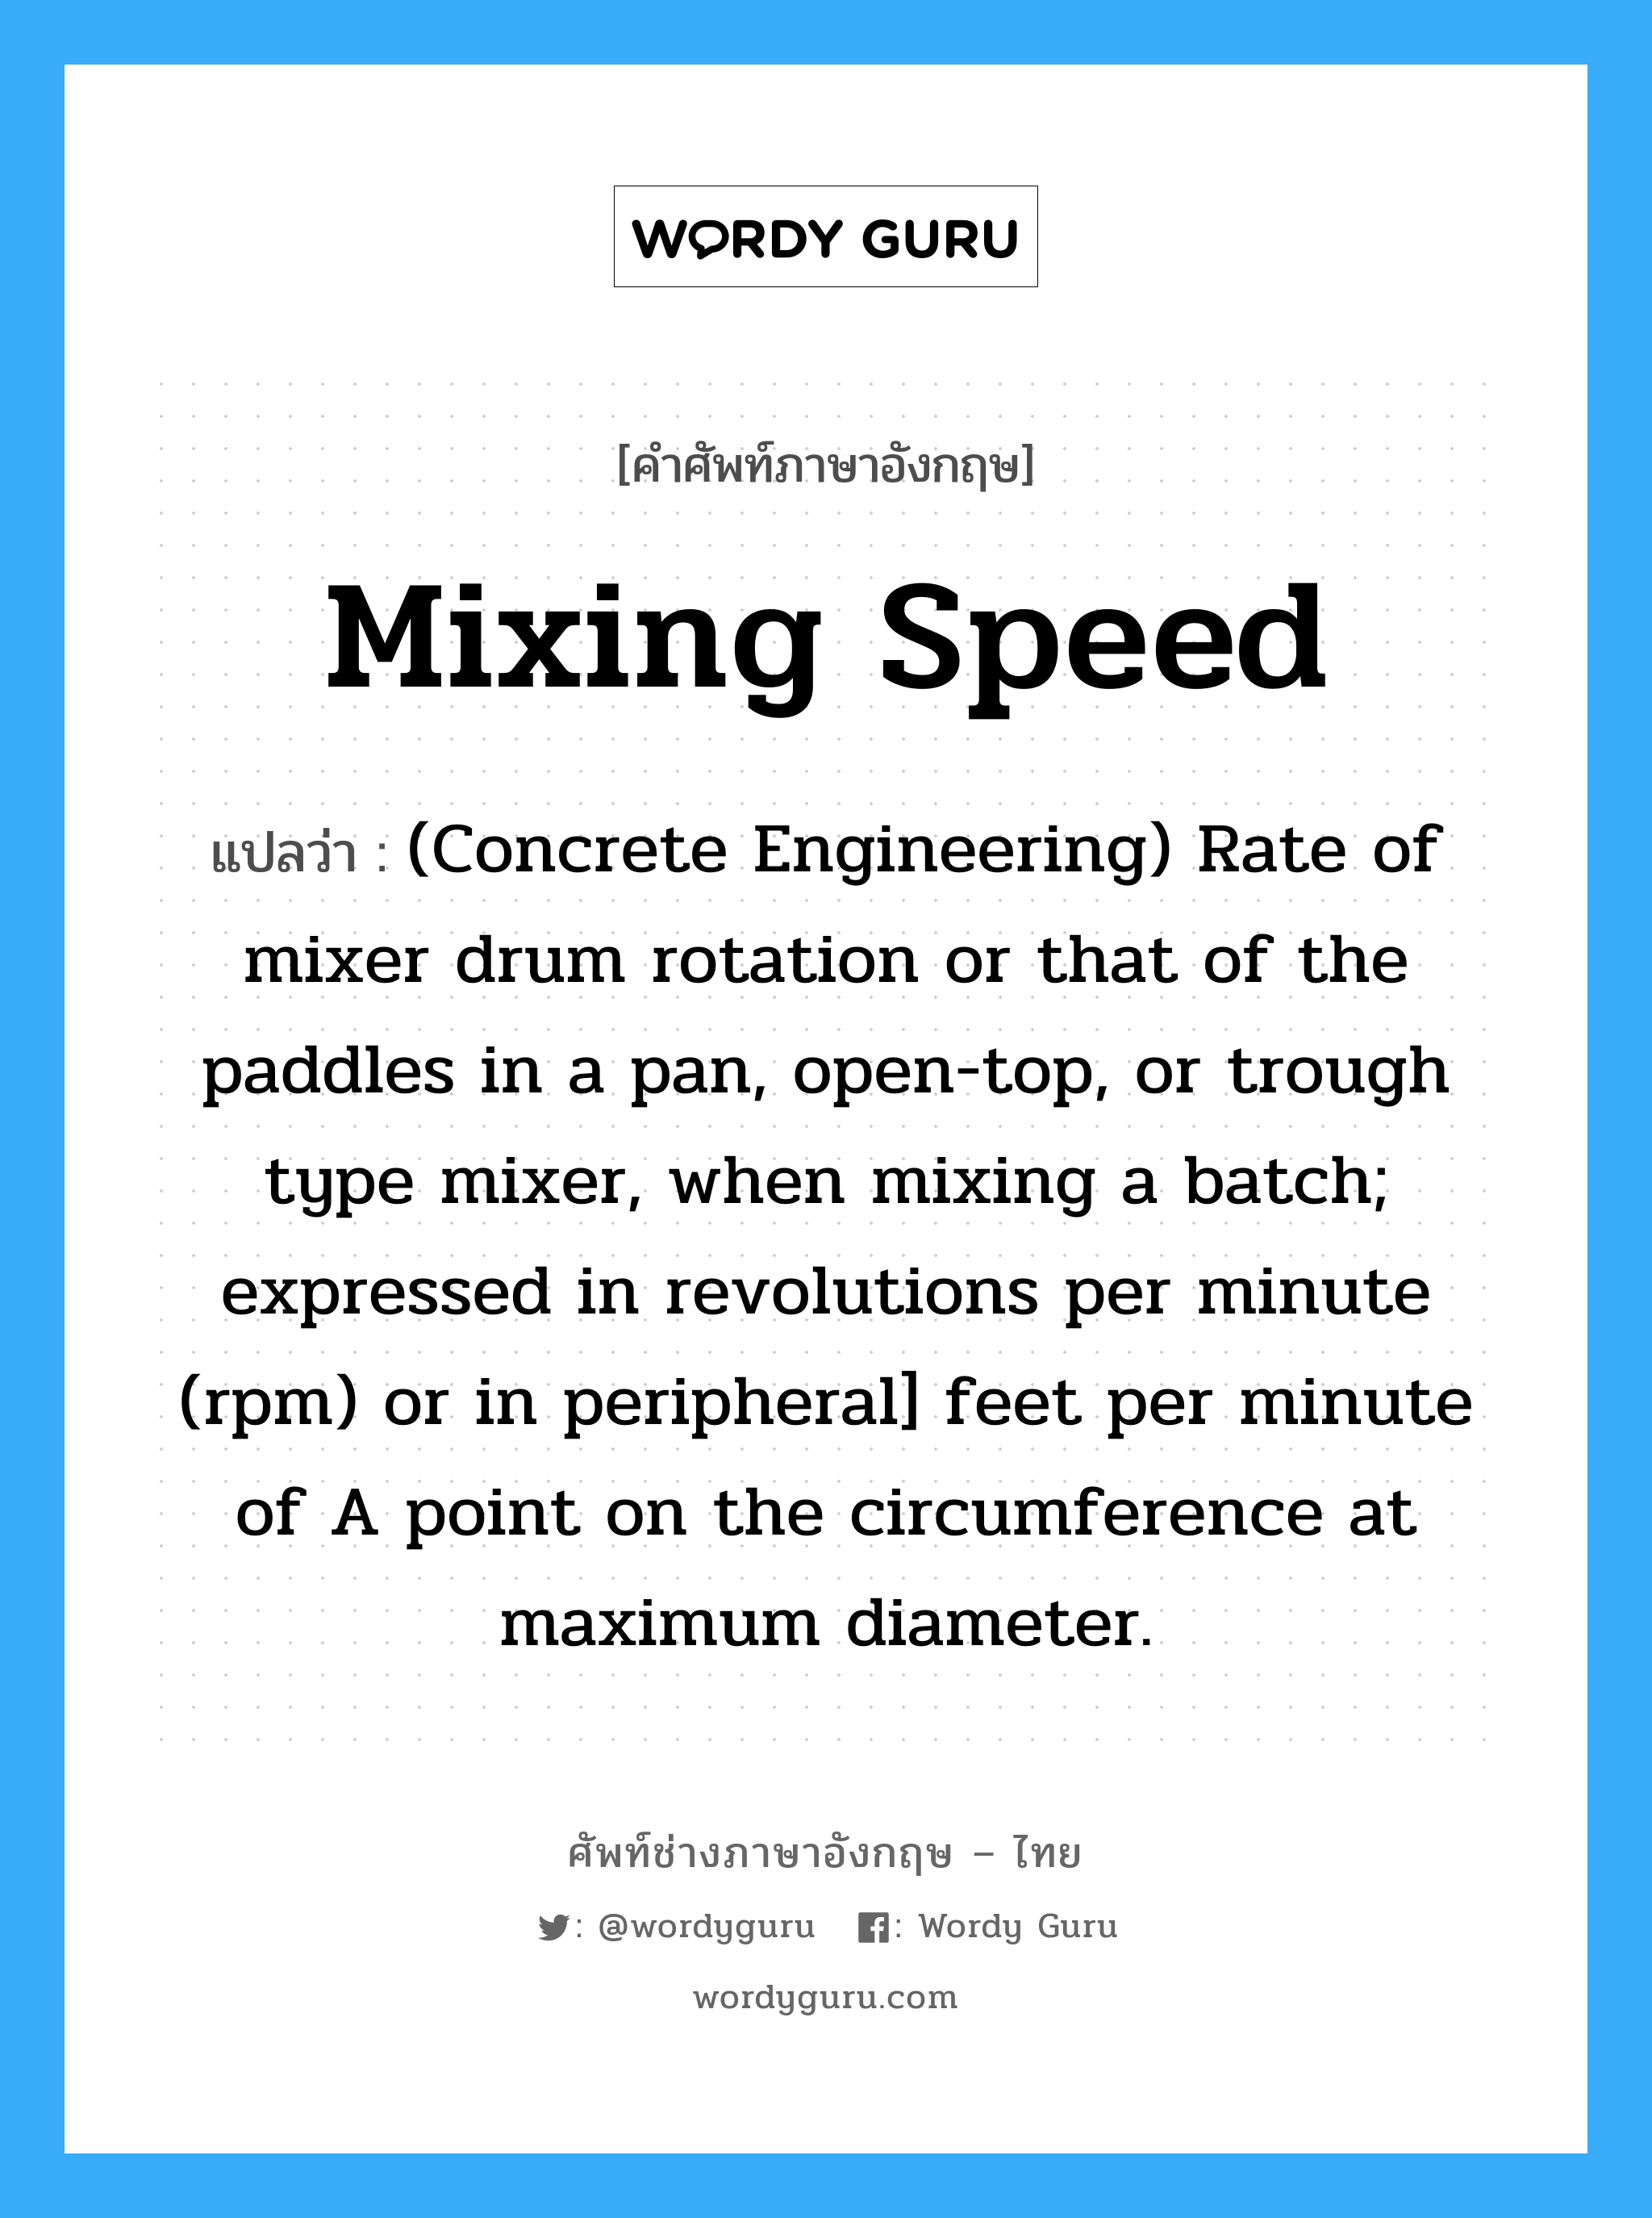 Mixing Speed แปลว่า?, คำศัพท์ช่างภาษาอังกฤษ - ไทย Mixing Speed คำศัพท์ภาษาอังกฤษ Mixing Speed แปลว่า (Concrete Engineering) Rate of mixer drum rotation or that of the paddles in a pan, open-top, or trough type mixer, when mixing a batch; expressed in revolutions per minute (rpm) or in peripheral] feet per minute of A point on the circumference at maximum diameter.